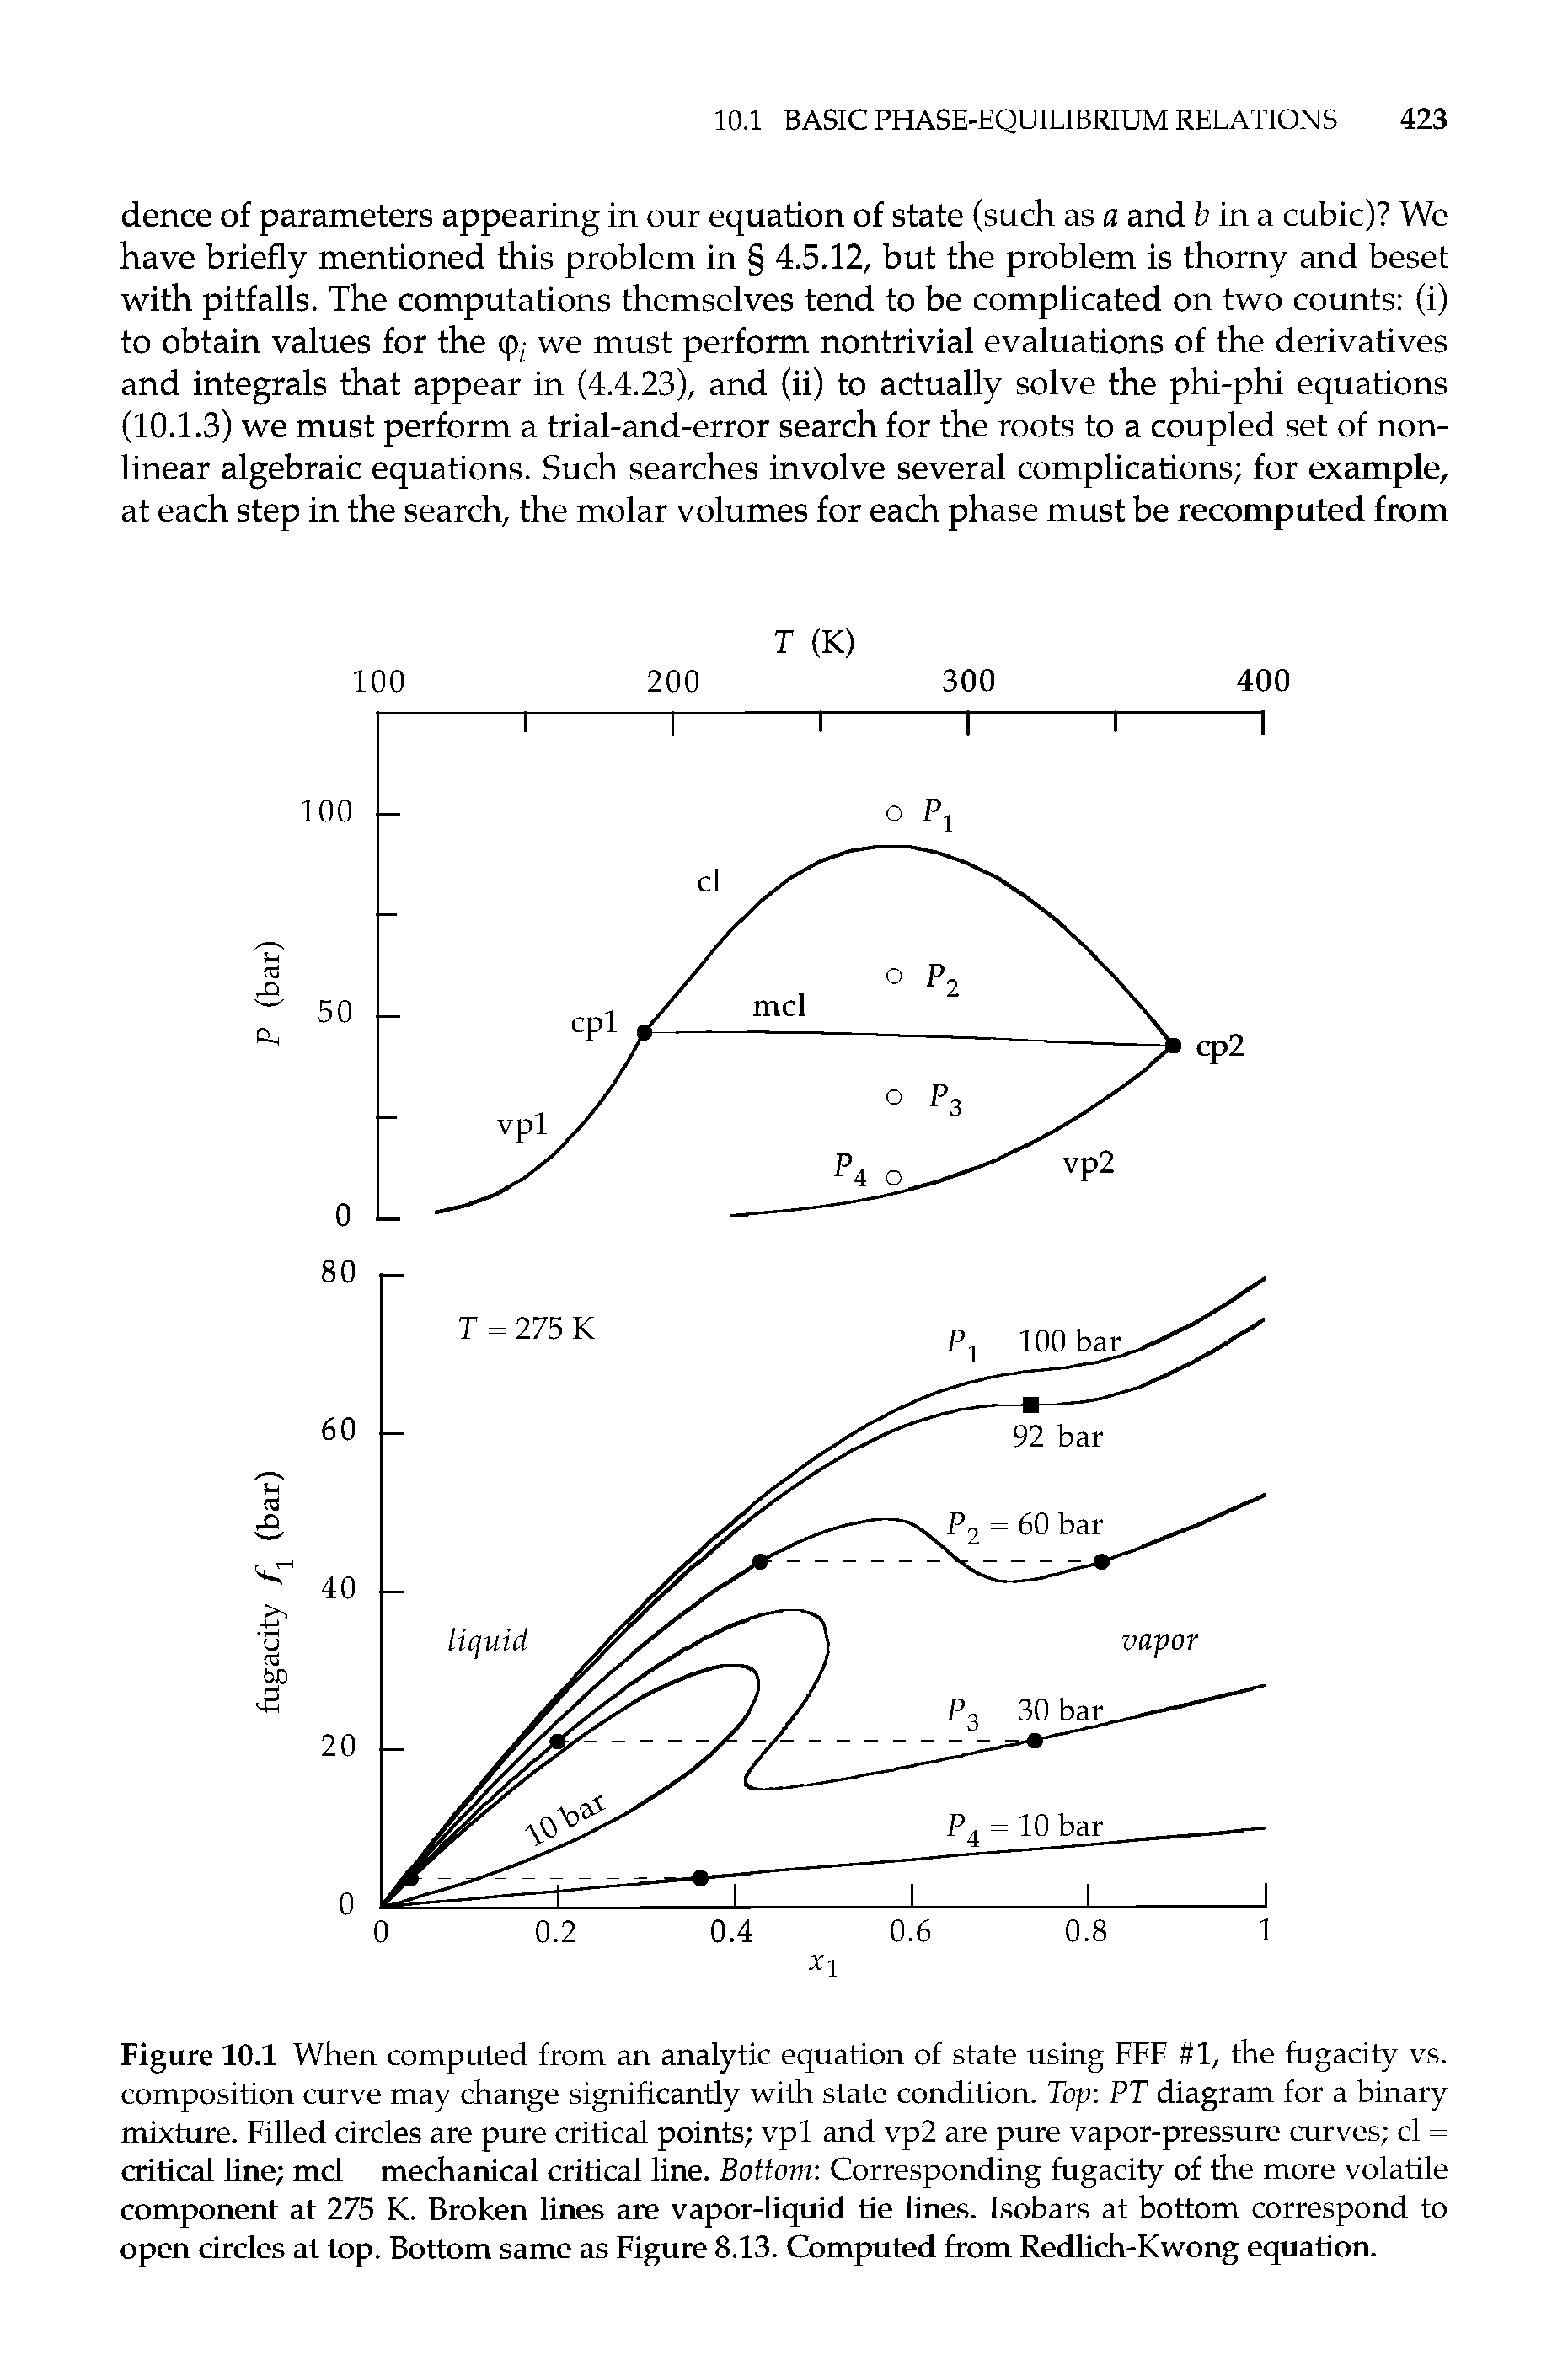 Figure 10.1 When computed from an analytic equation of state using FFF 1, the fugacity vs. composition curve may change significantly with state condition. Top PT diagram for a binary mixture. Filled circles are pure critical points vpl and vp2 are pure vapor-pressure curves cl = critical line mcl = mechanical critical line. Bottom Corresponding fugacity of the more volatile component at 275 K. Broken lines are vapor-liquid tie lines. Isobars at bottom correspond to open circles at top. Bottom same as Figure 8.13. Computed from Redlich-Kwong equation.